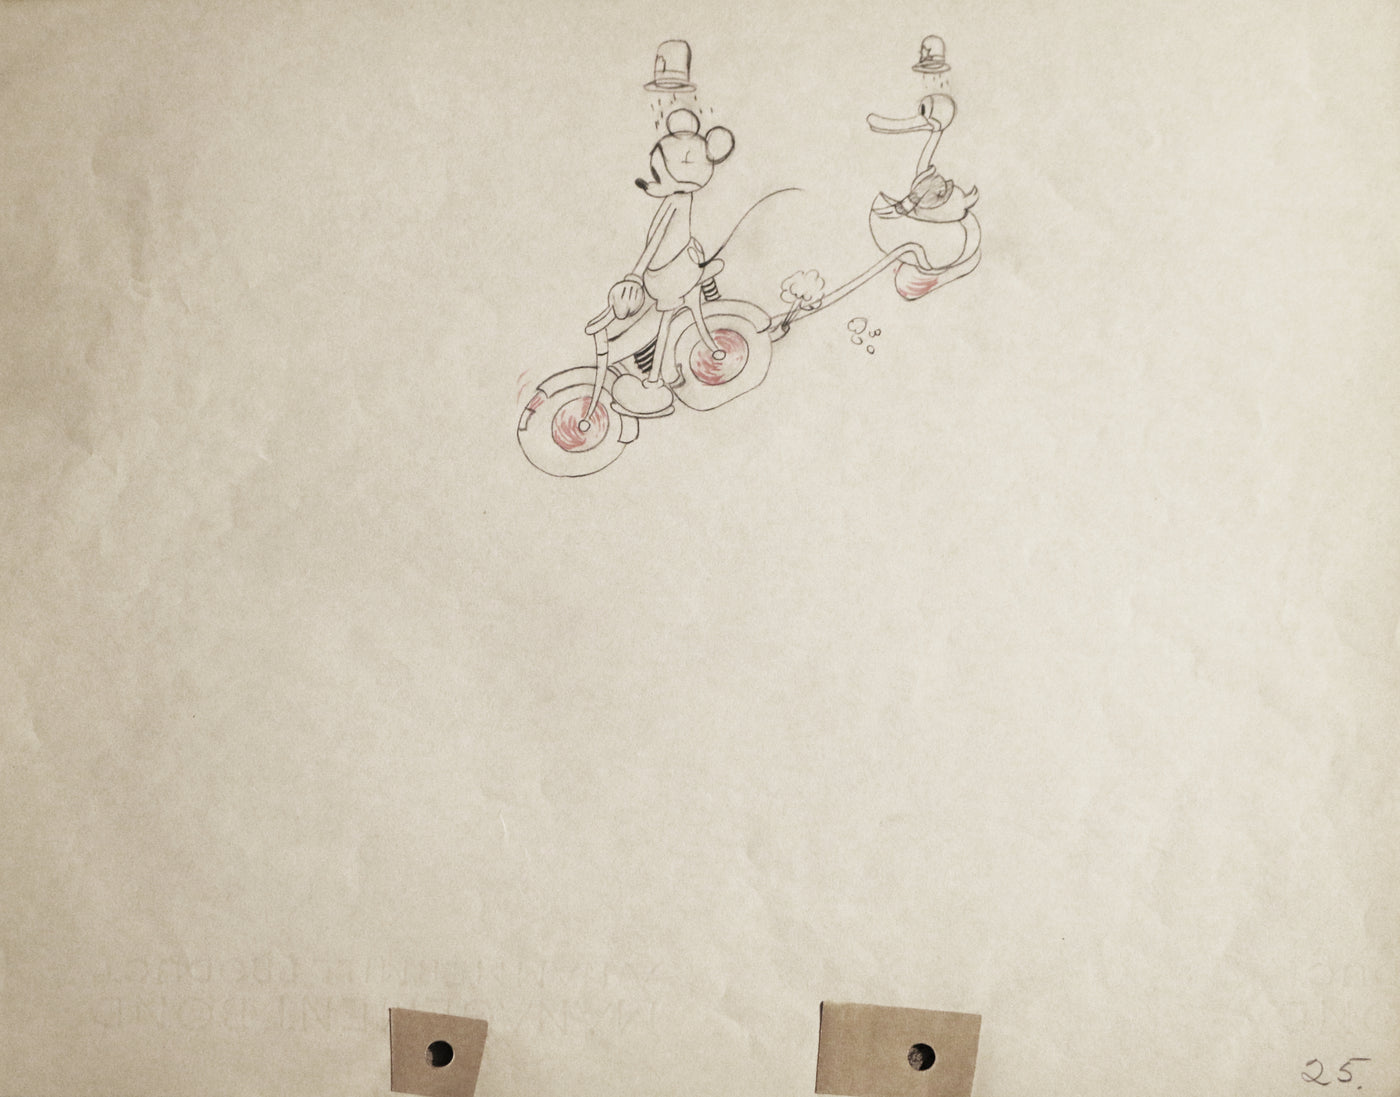 Original Walt Disney Production Drawing of Mickey Mouse and Donald Duck from The Dognapper (1934)